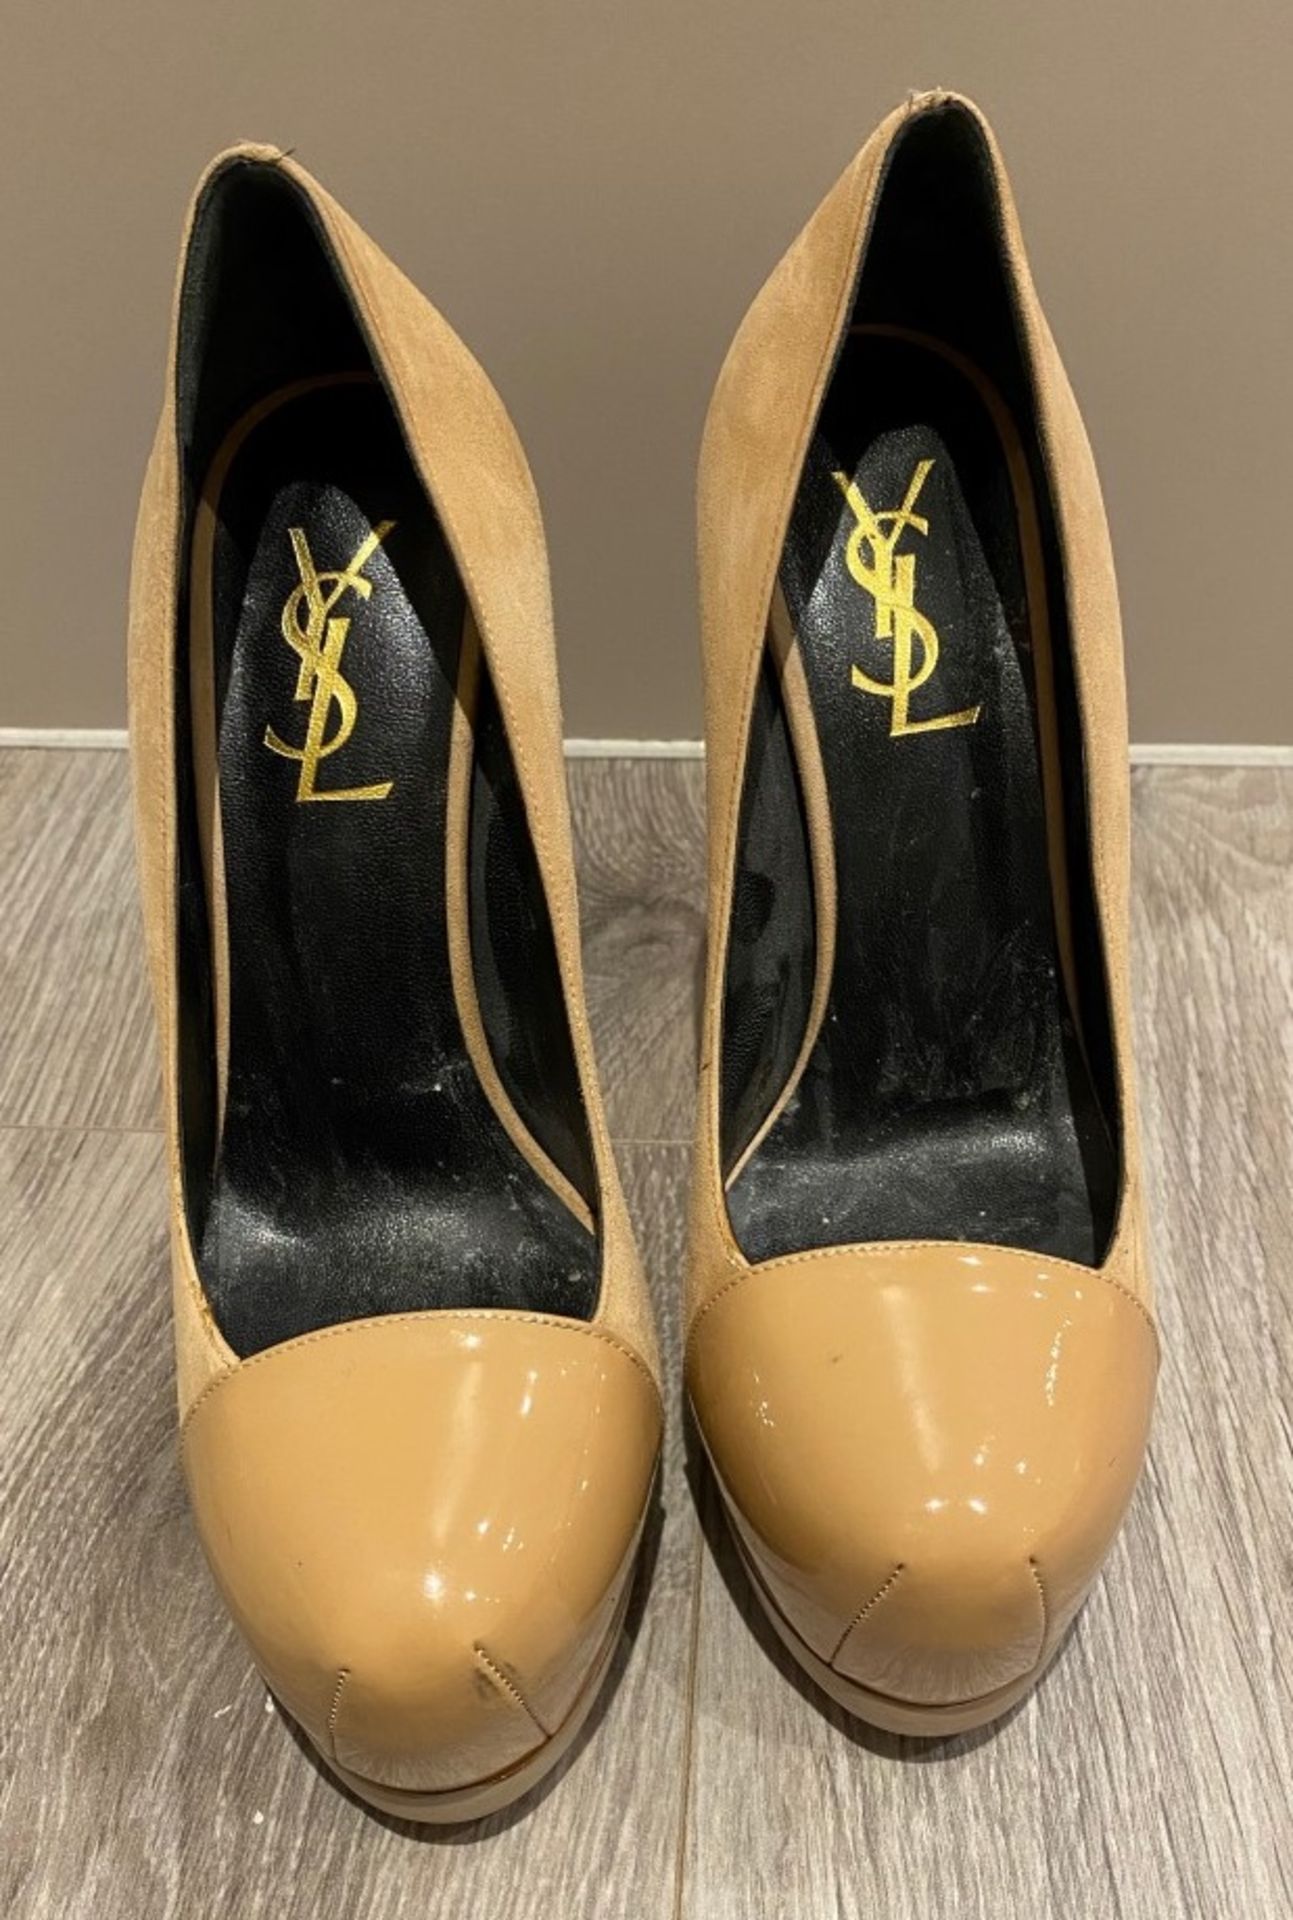 1 x Pair Of Genuine YSL High Heel Shoes In Light Beige - Size: 36 - Preowned in Very Good Condition - Image 2 of 4